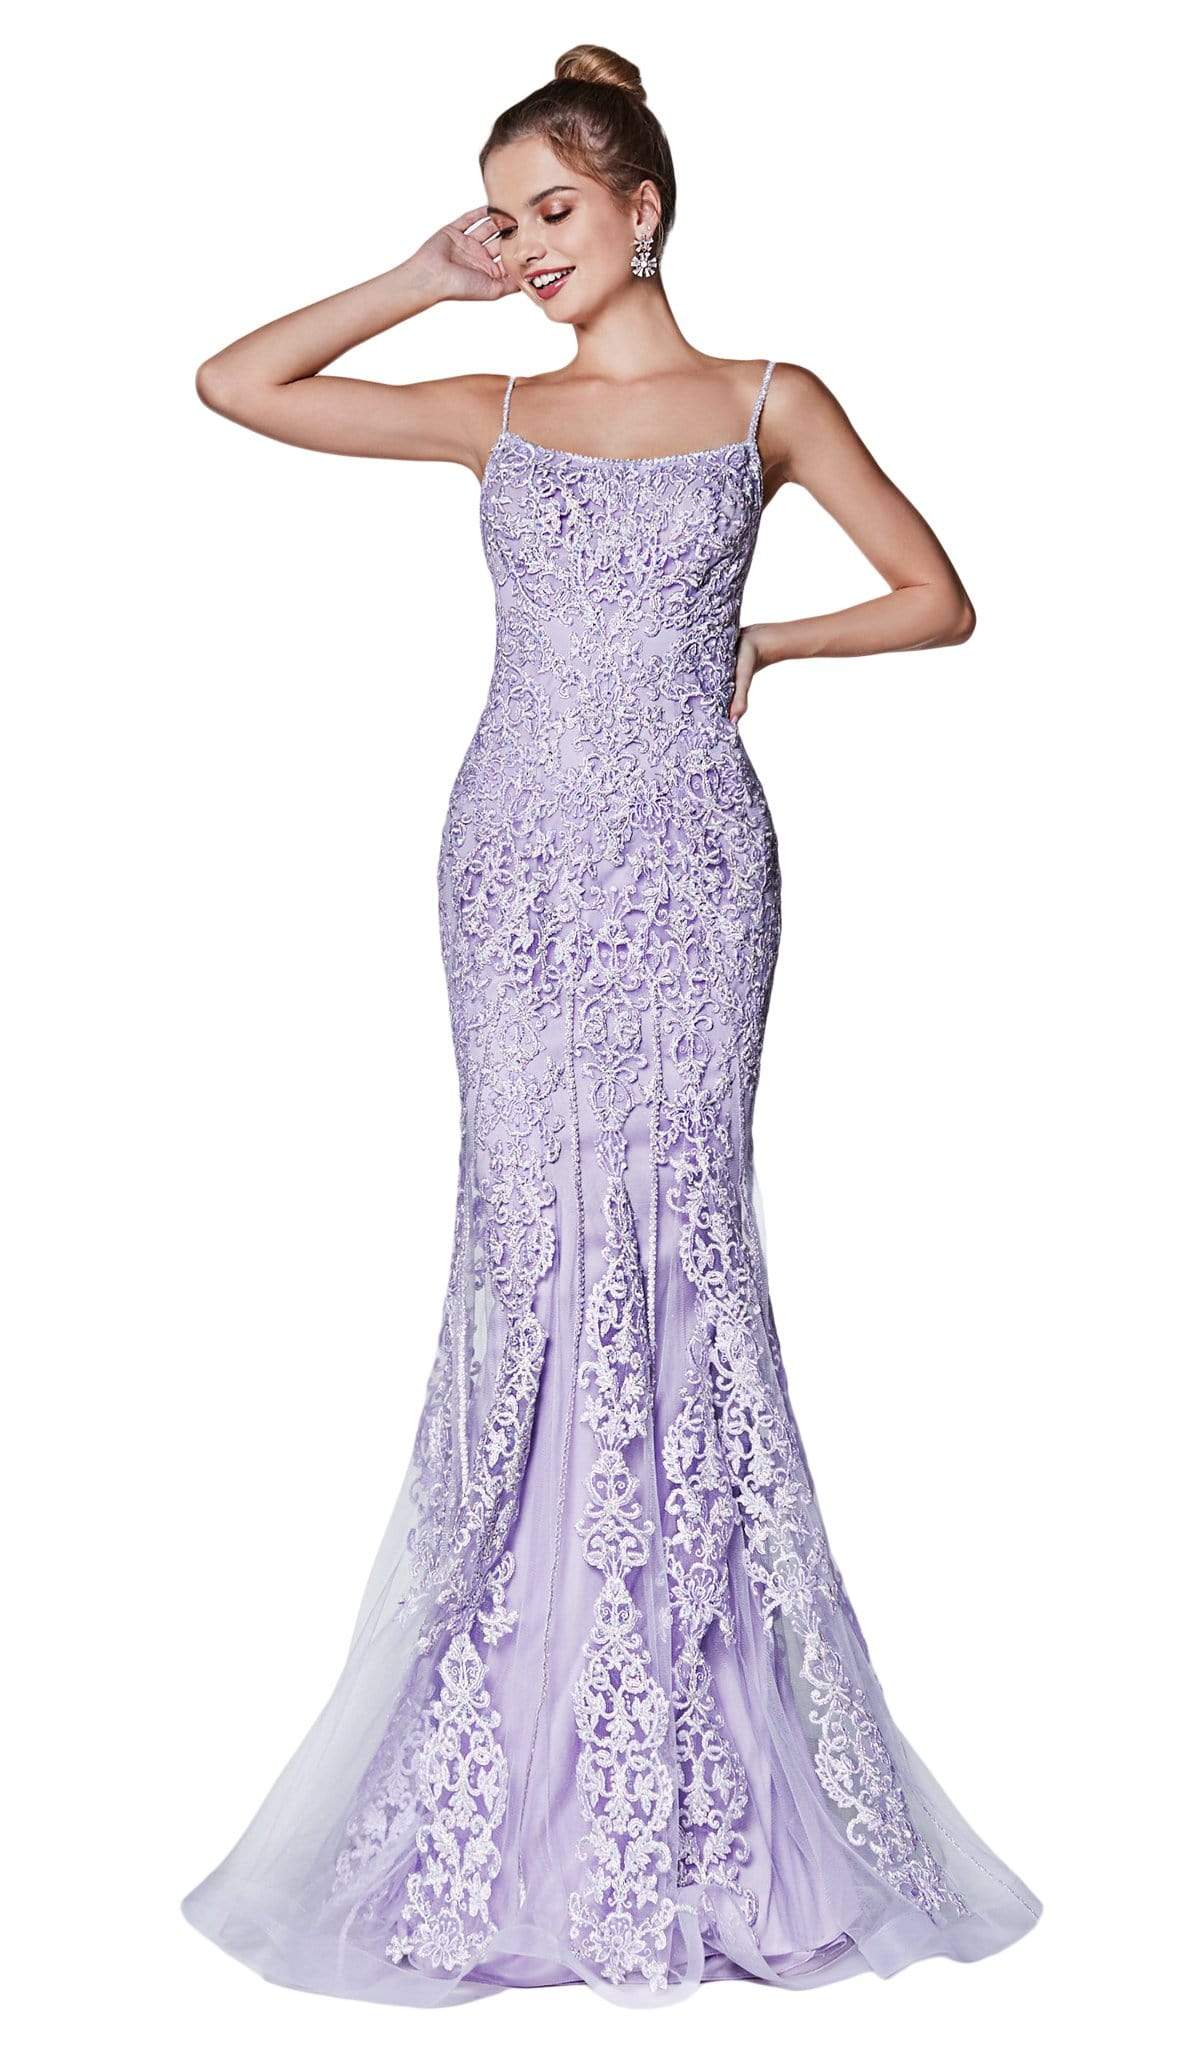 Cinderella Divine - KC885 Sleeveless Sparkly Beaded Lace Mermaid Gown Special Occasion Dress 4 / Lilac